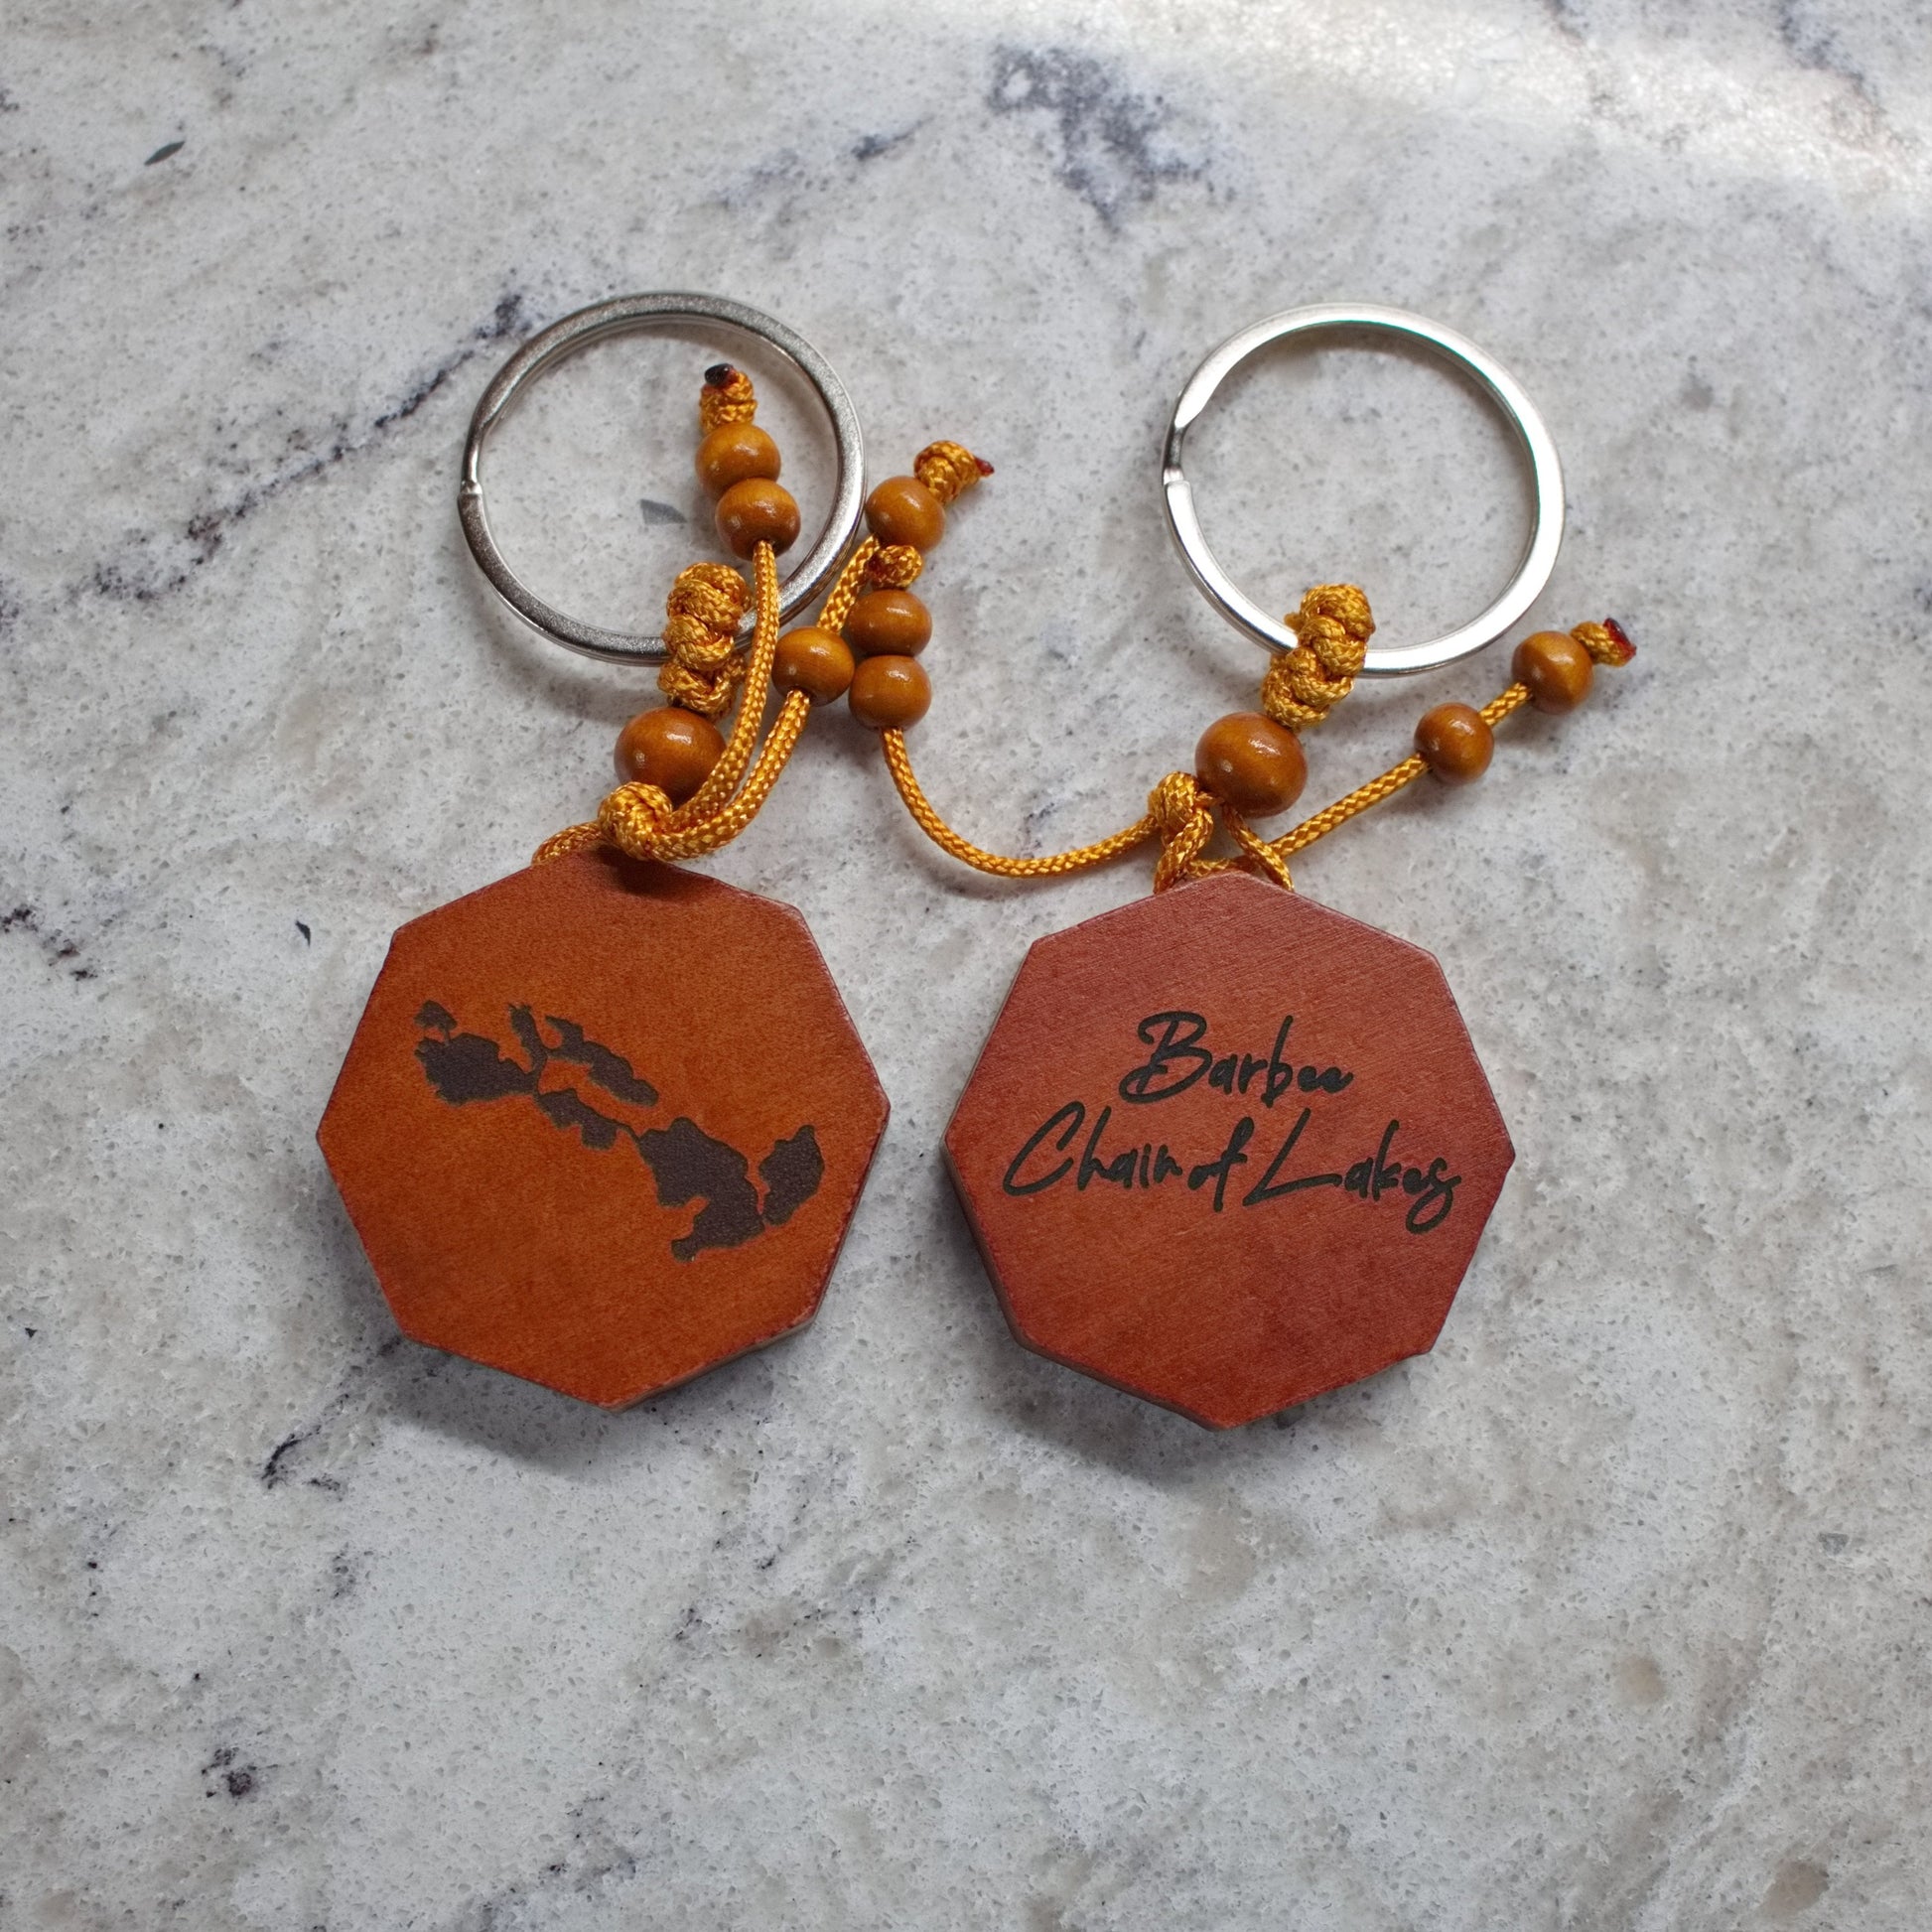 Barbee Chain of Lakes, Keychain, North Webster